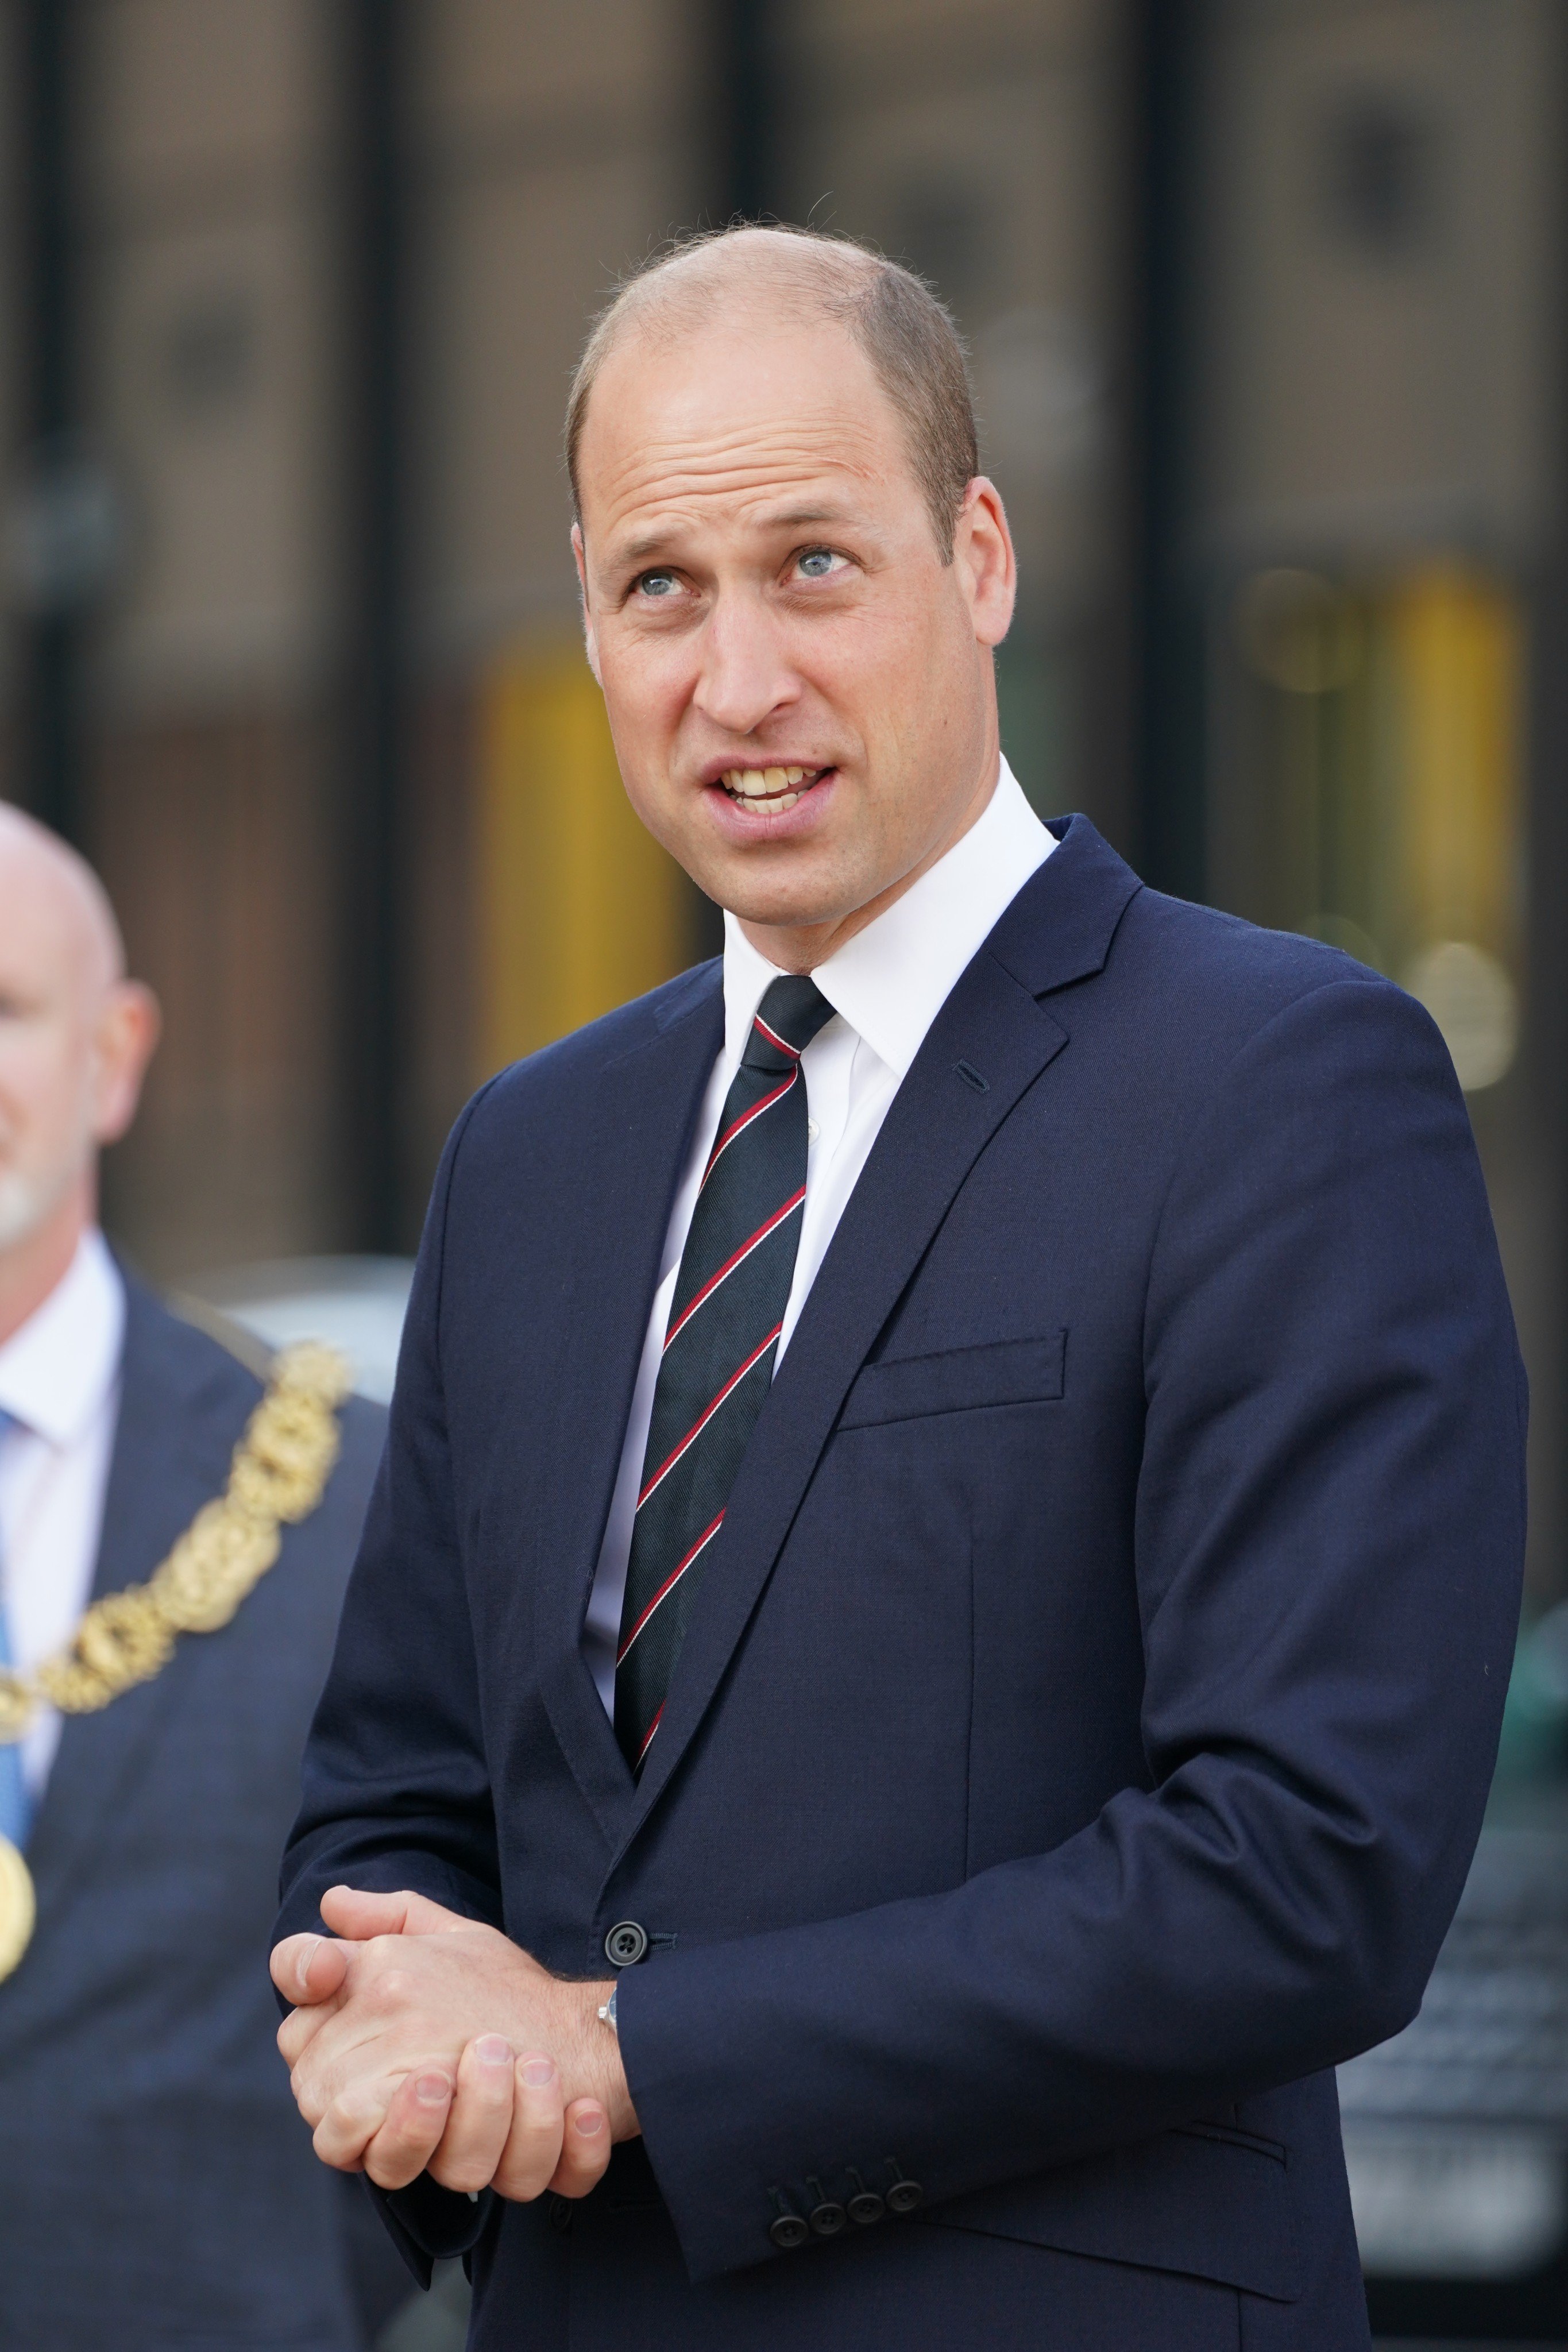 Prince William was crowned the “world’s sexiest bald man” after a study published in a British newspaper. Photo: Getty Images